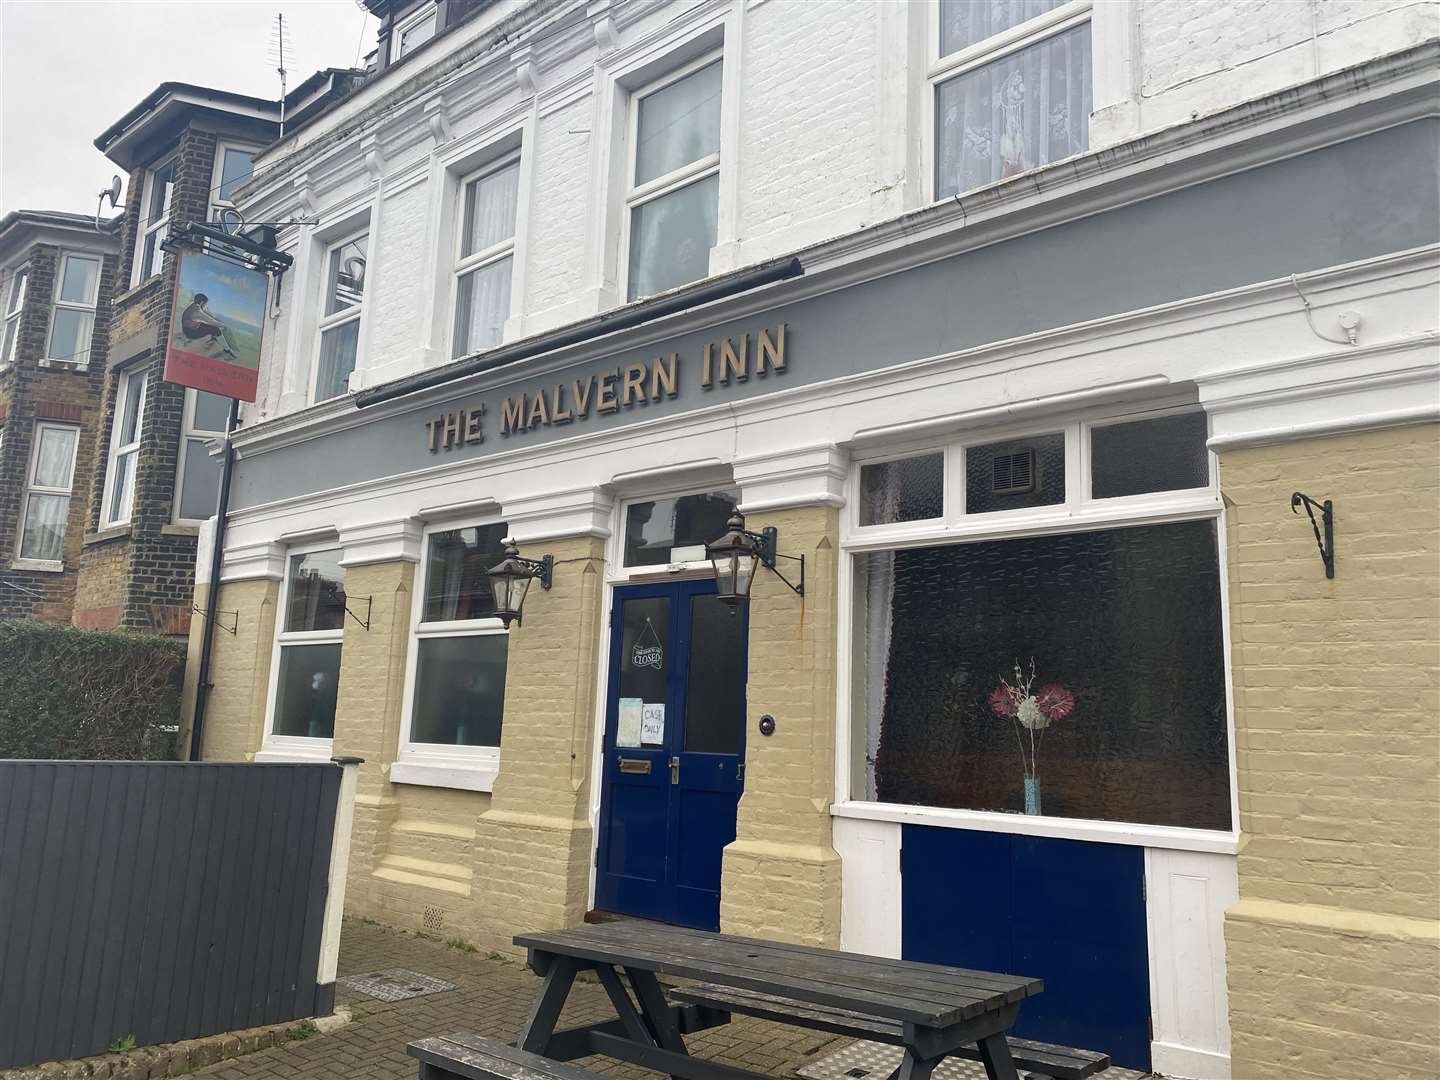 A street party has been organised by the Malvern Inn